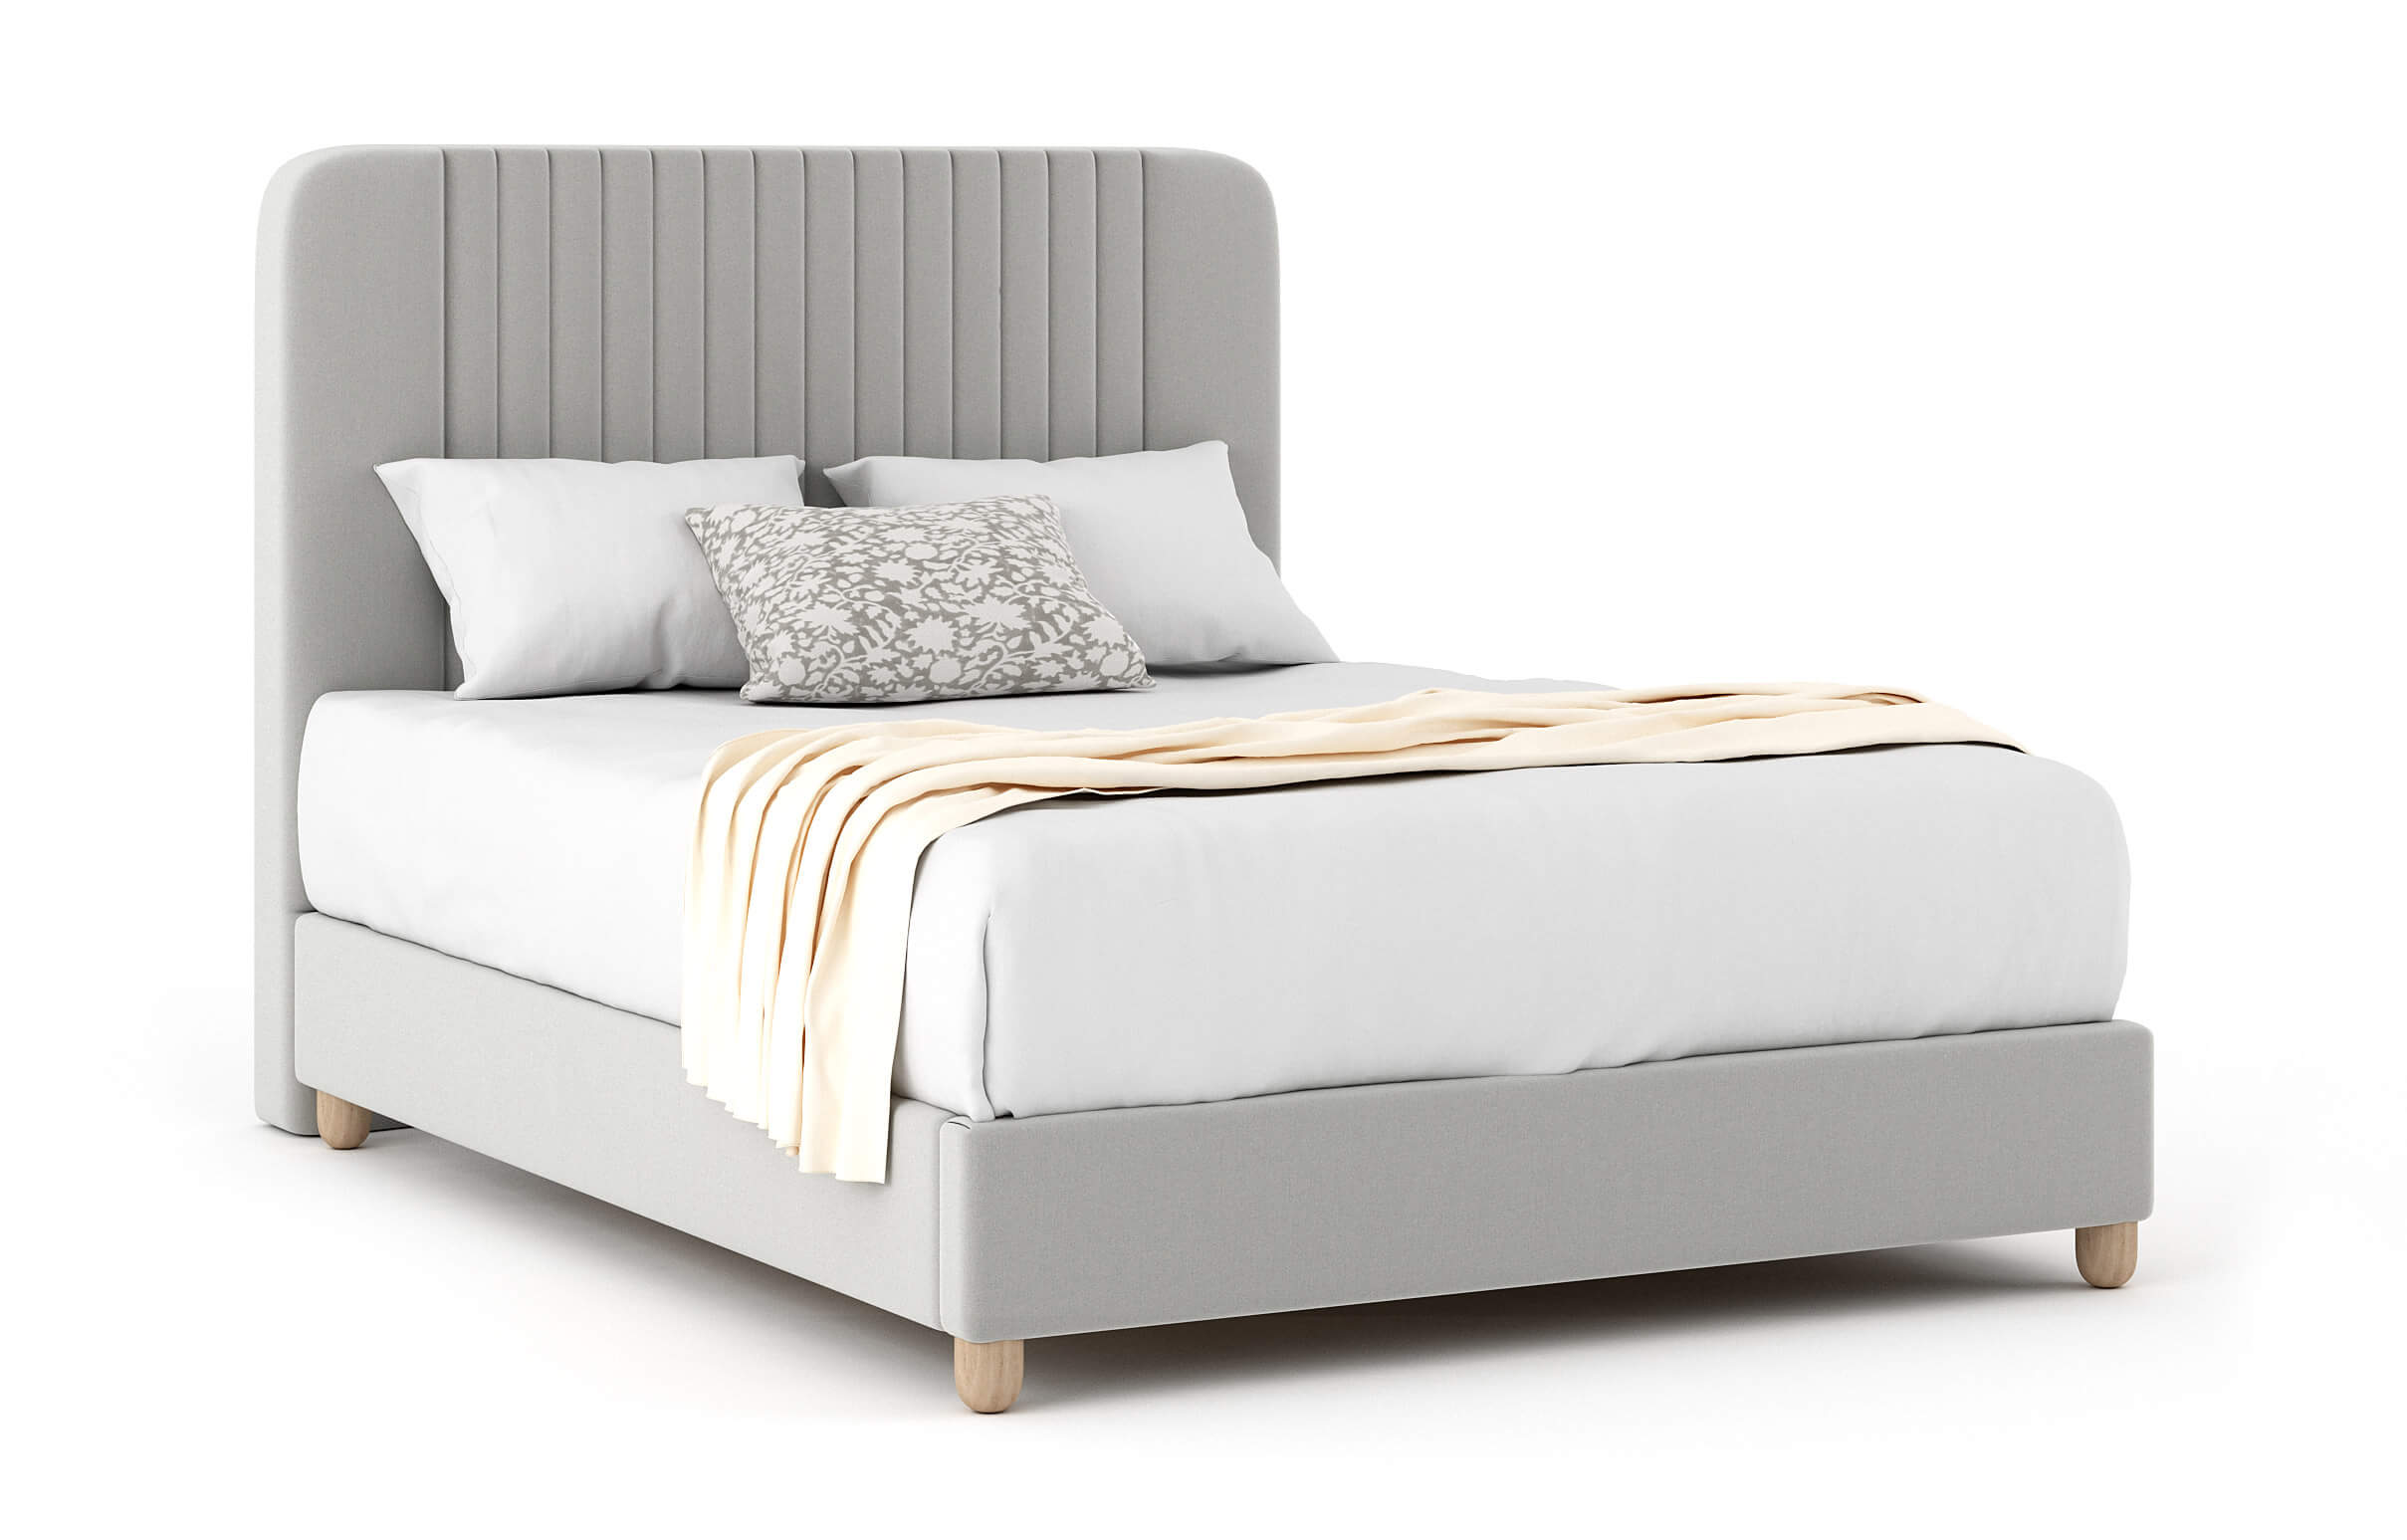 G: Pippen Bed in Smart Smoke fabric